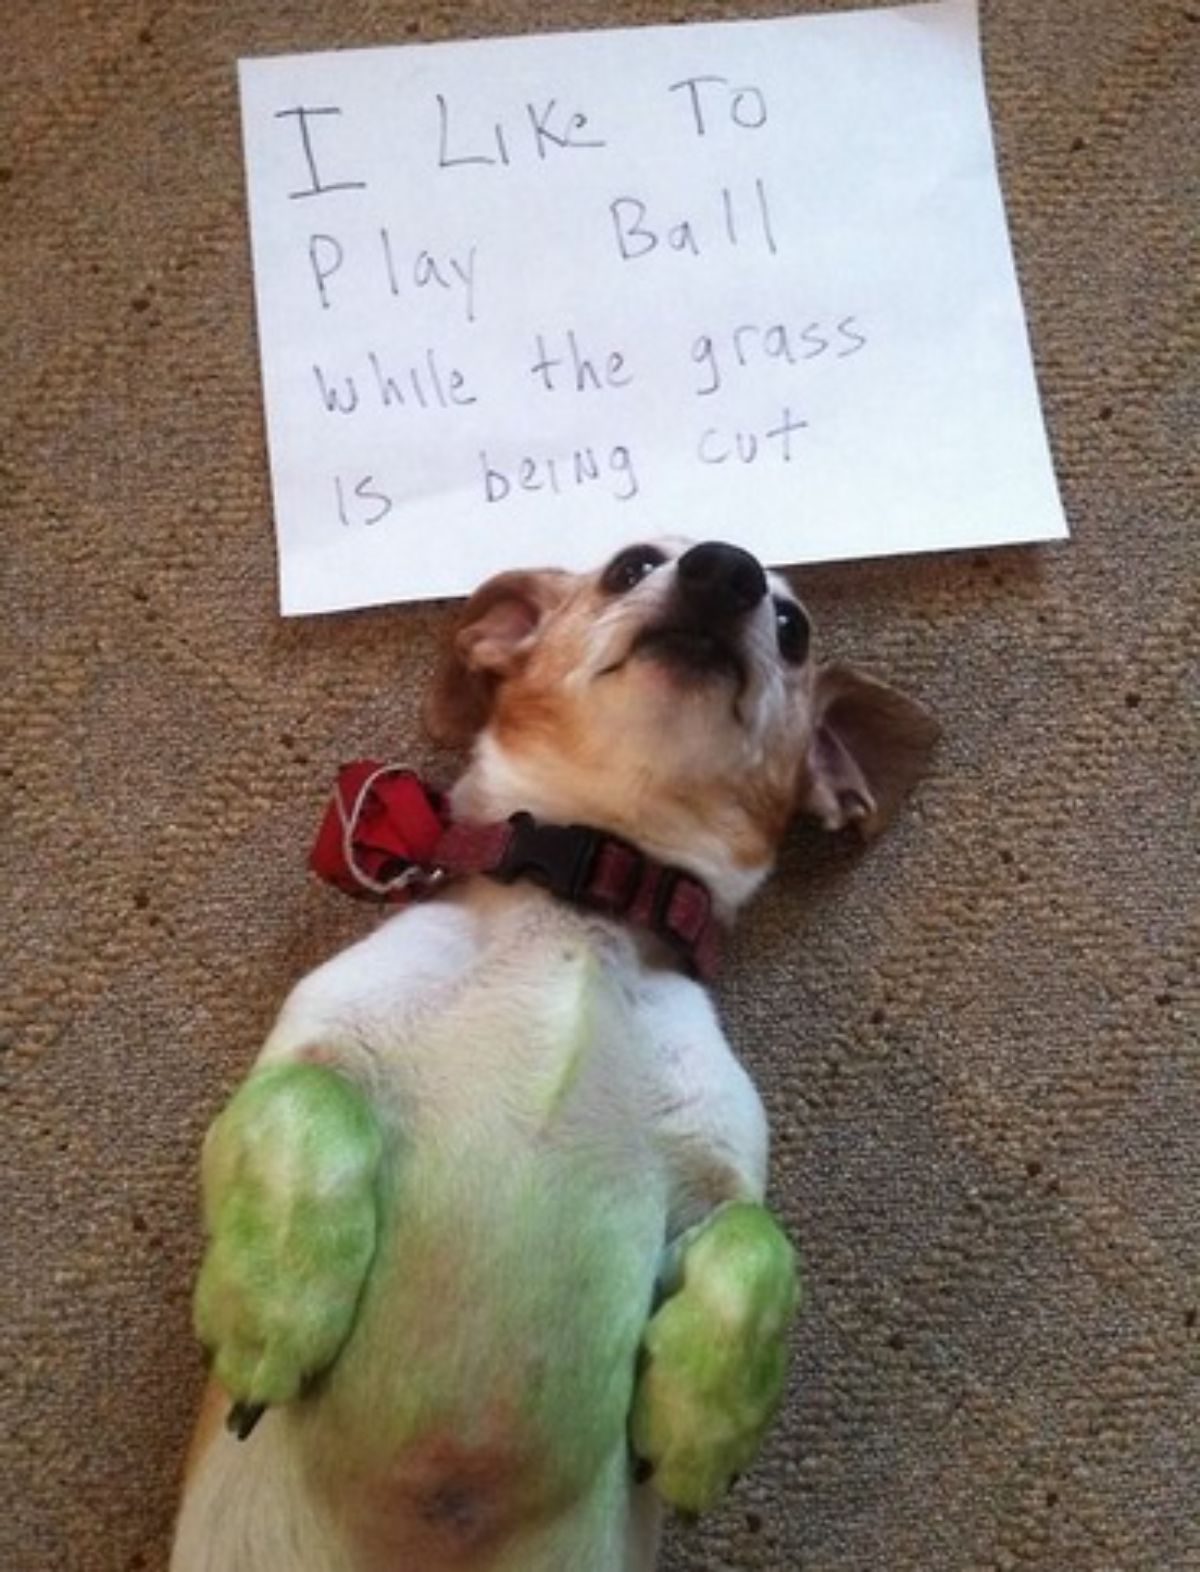 brown and white dog with green-tinted front legs laying belly up on brown carpet with a note saying "I like to play ball while the grass is being cut"